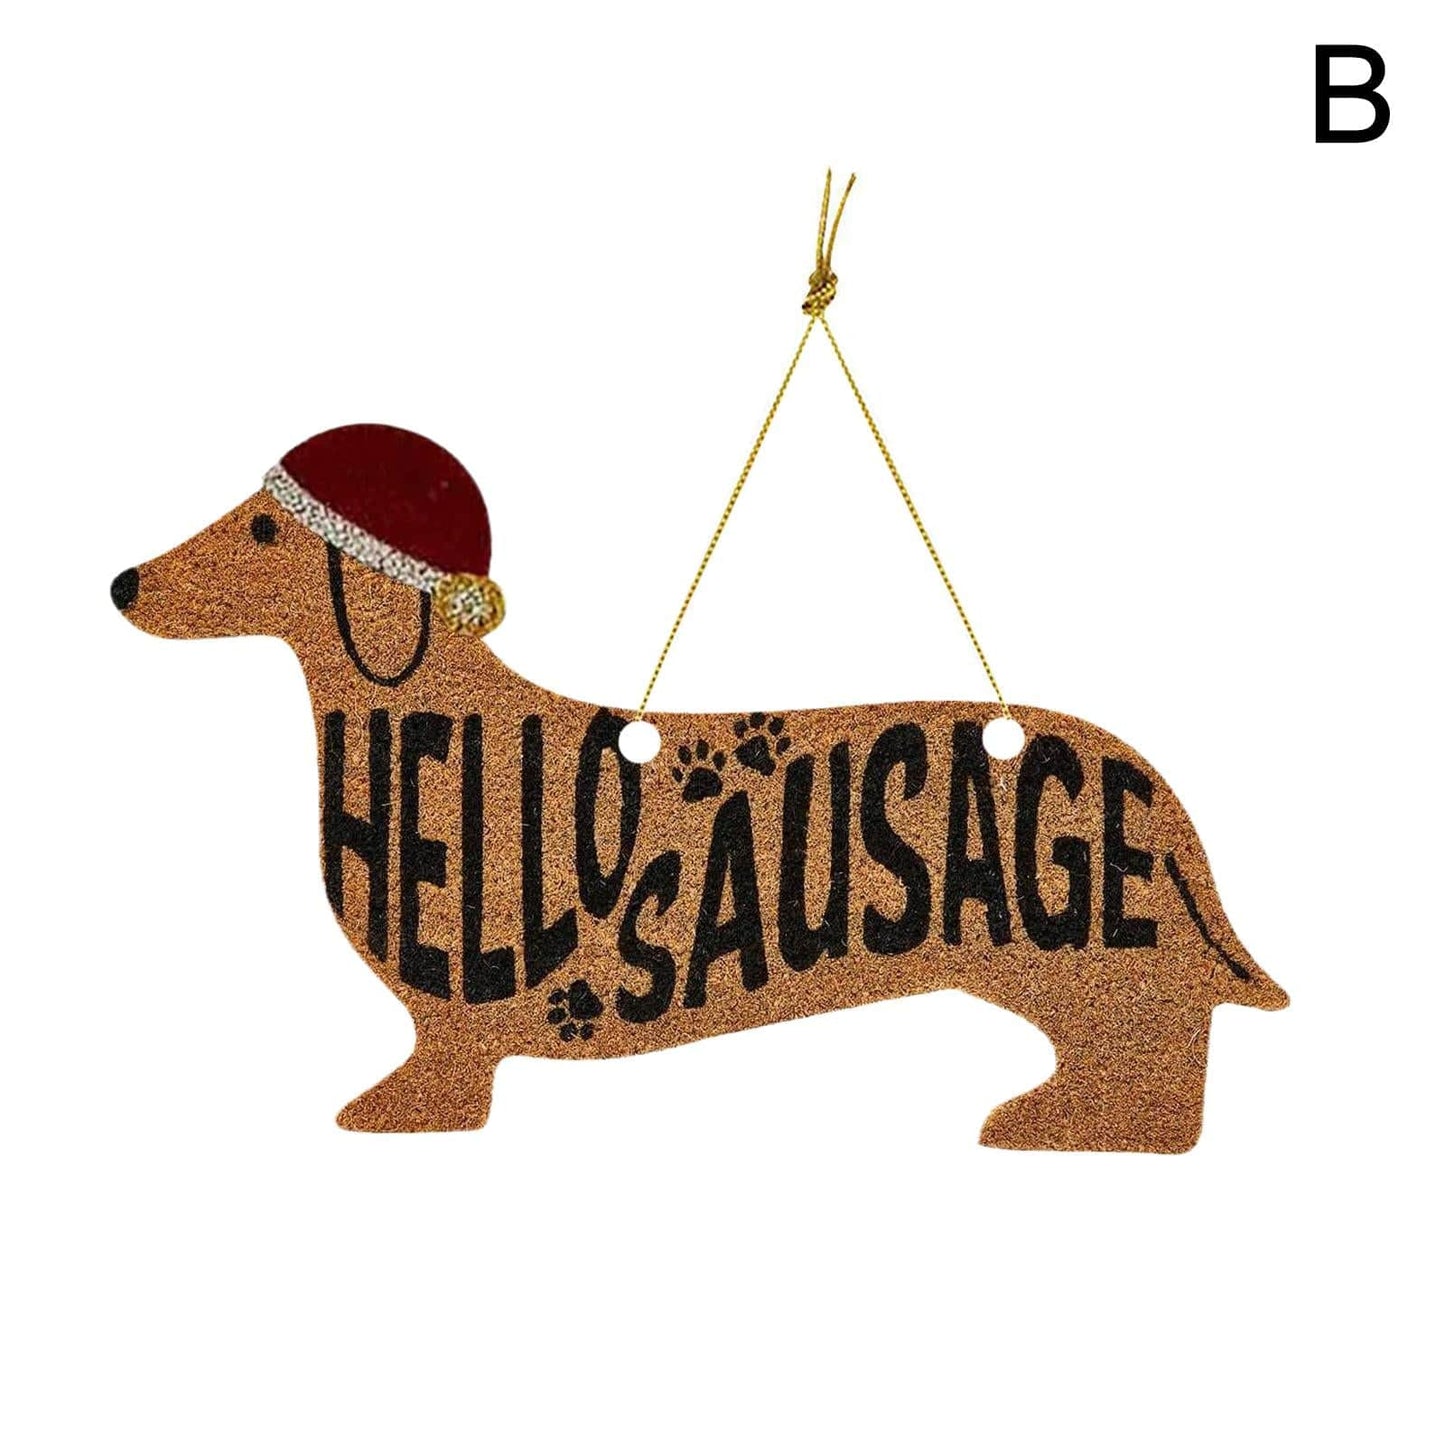 Hello Sausage Dachshund Ornaments B - 4 pieces The Doxie World